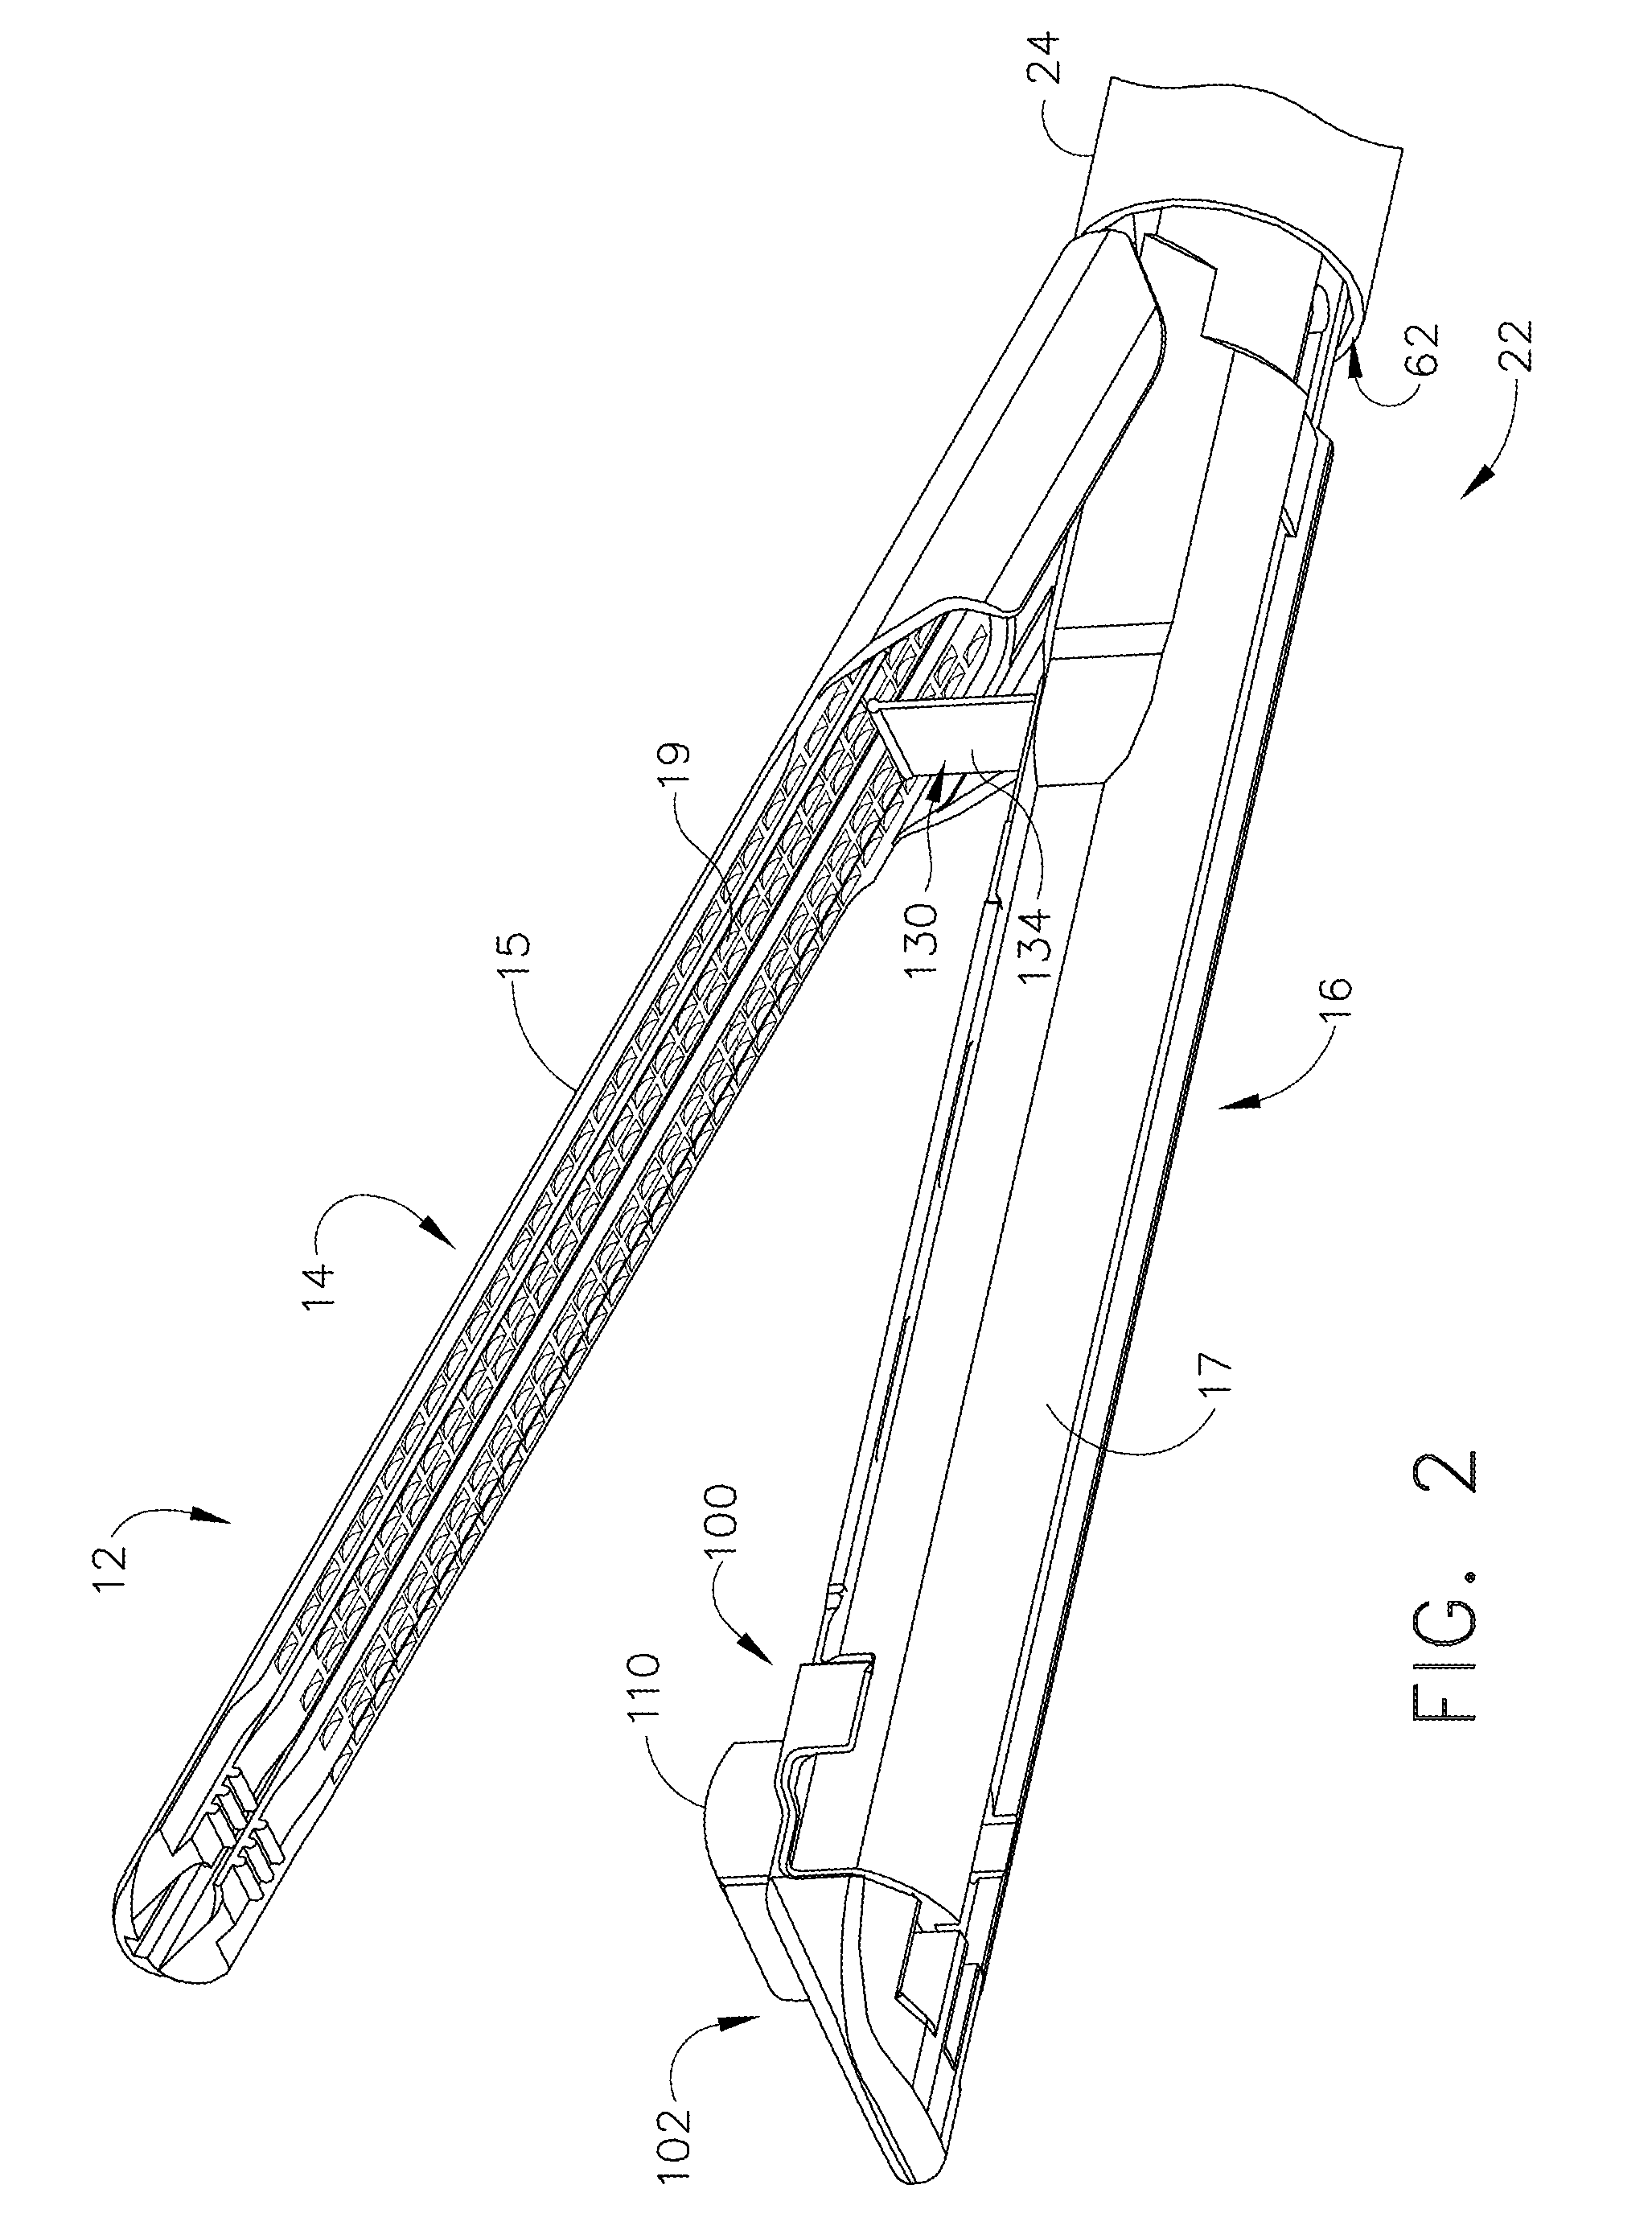 Laparoscopic tissue thickness and clamp load measuring devices